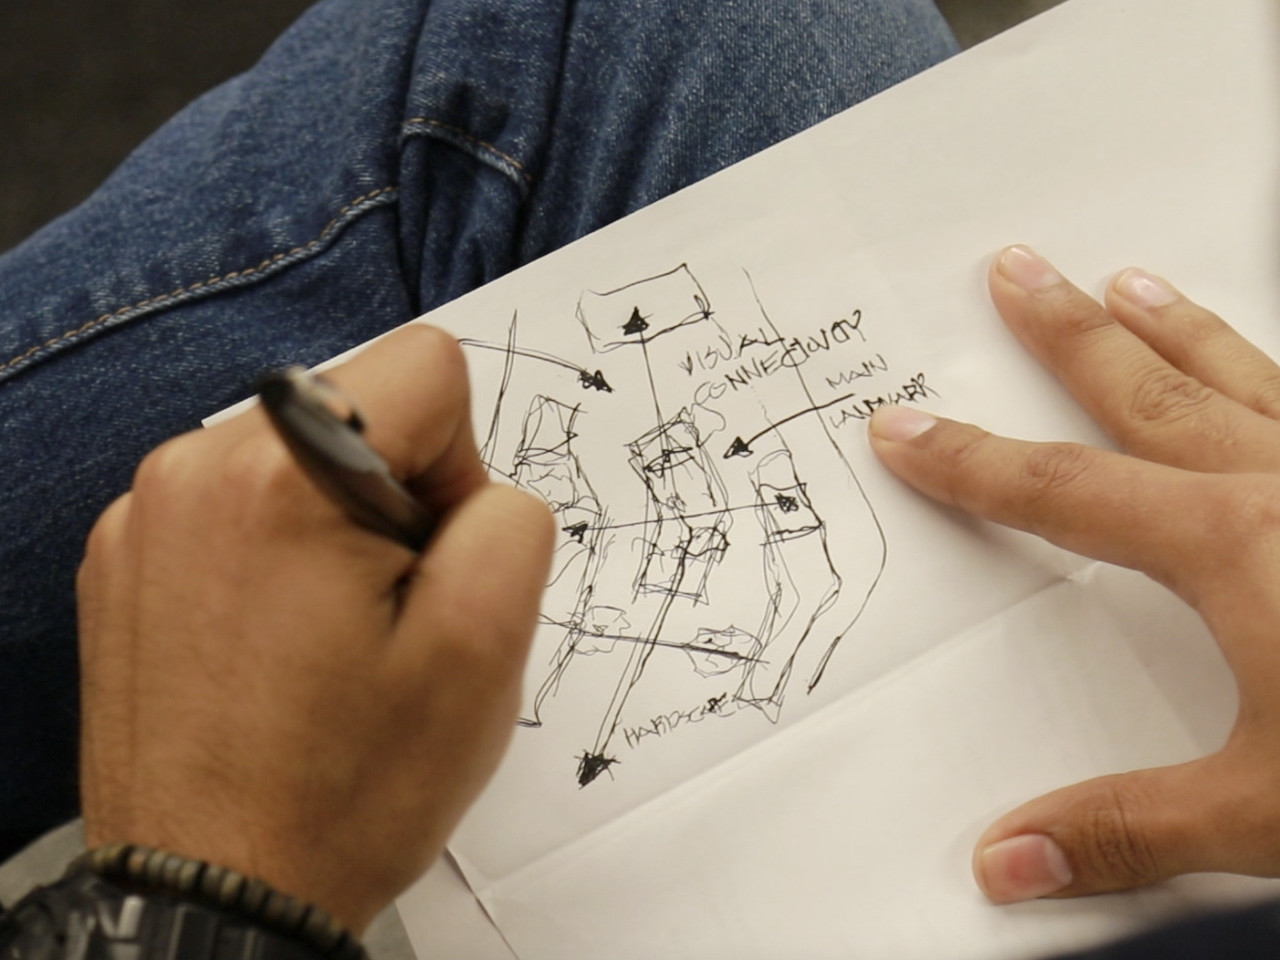 Close up view of student sketching a site plan with labeled arrows